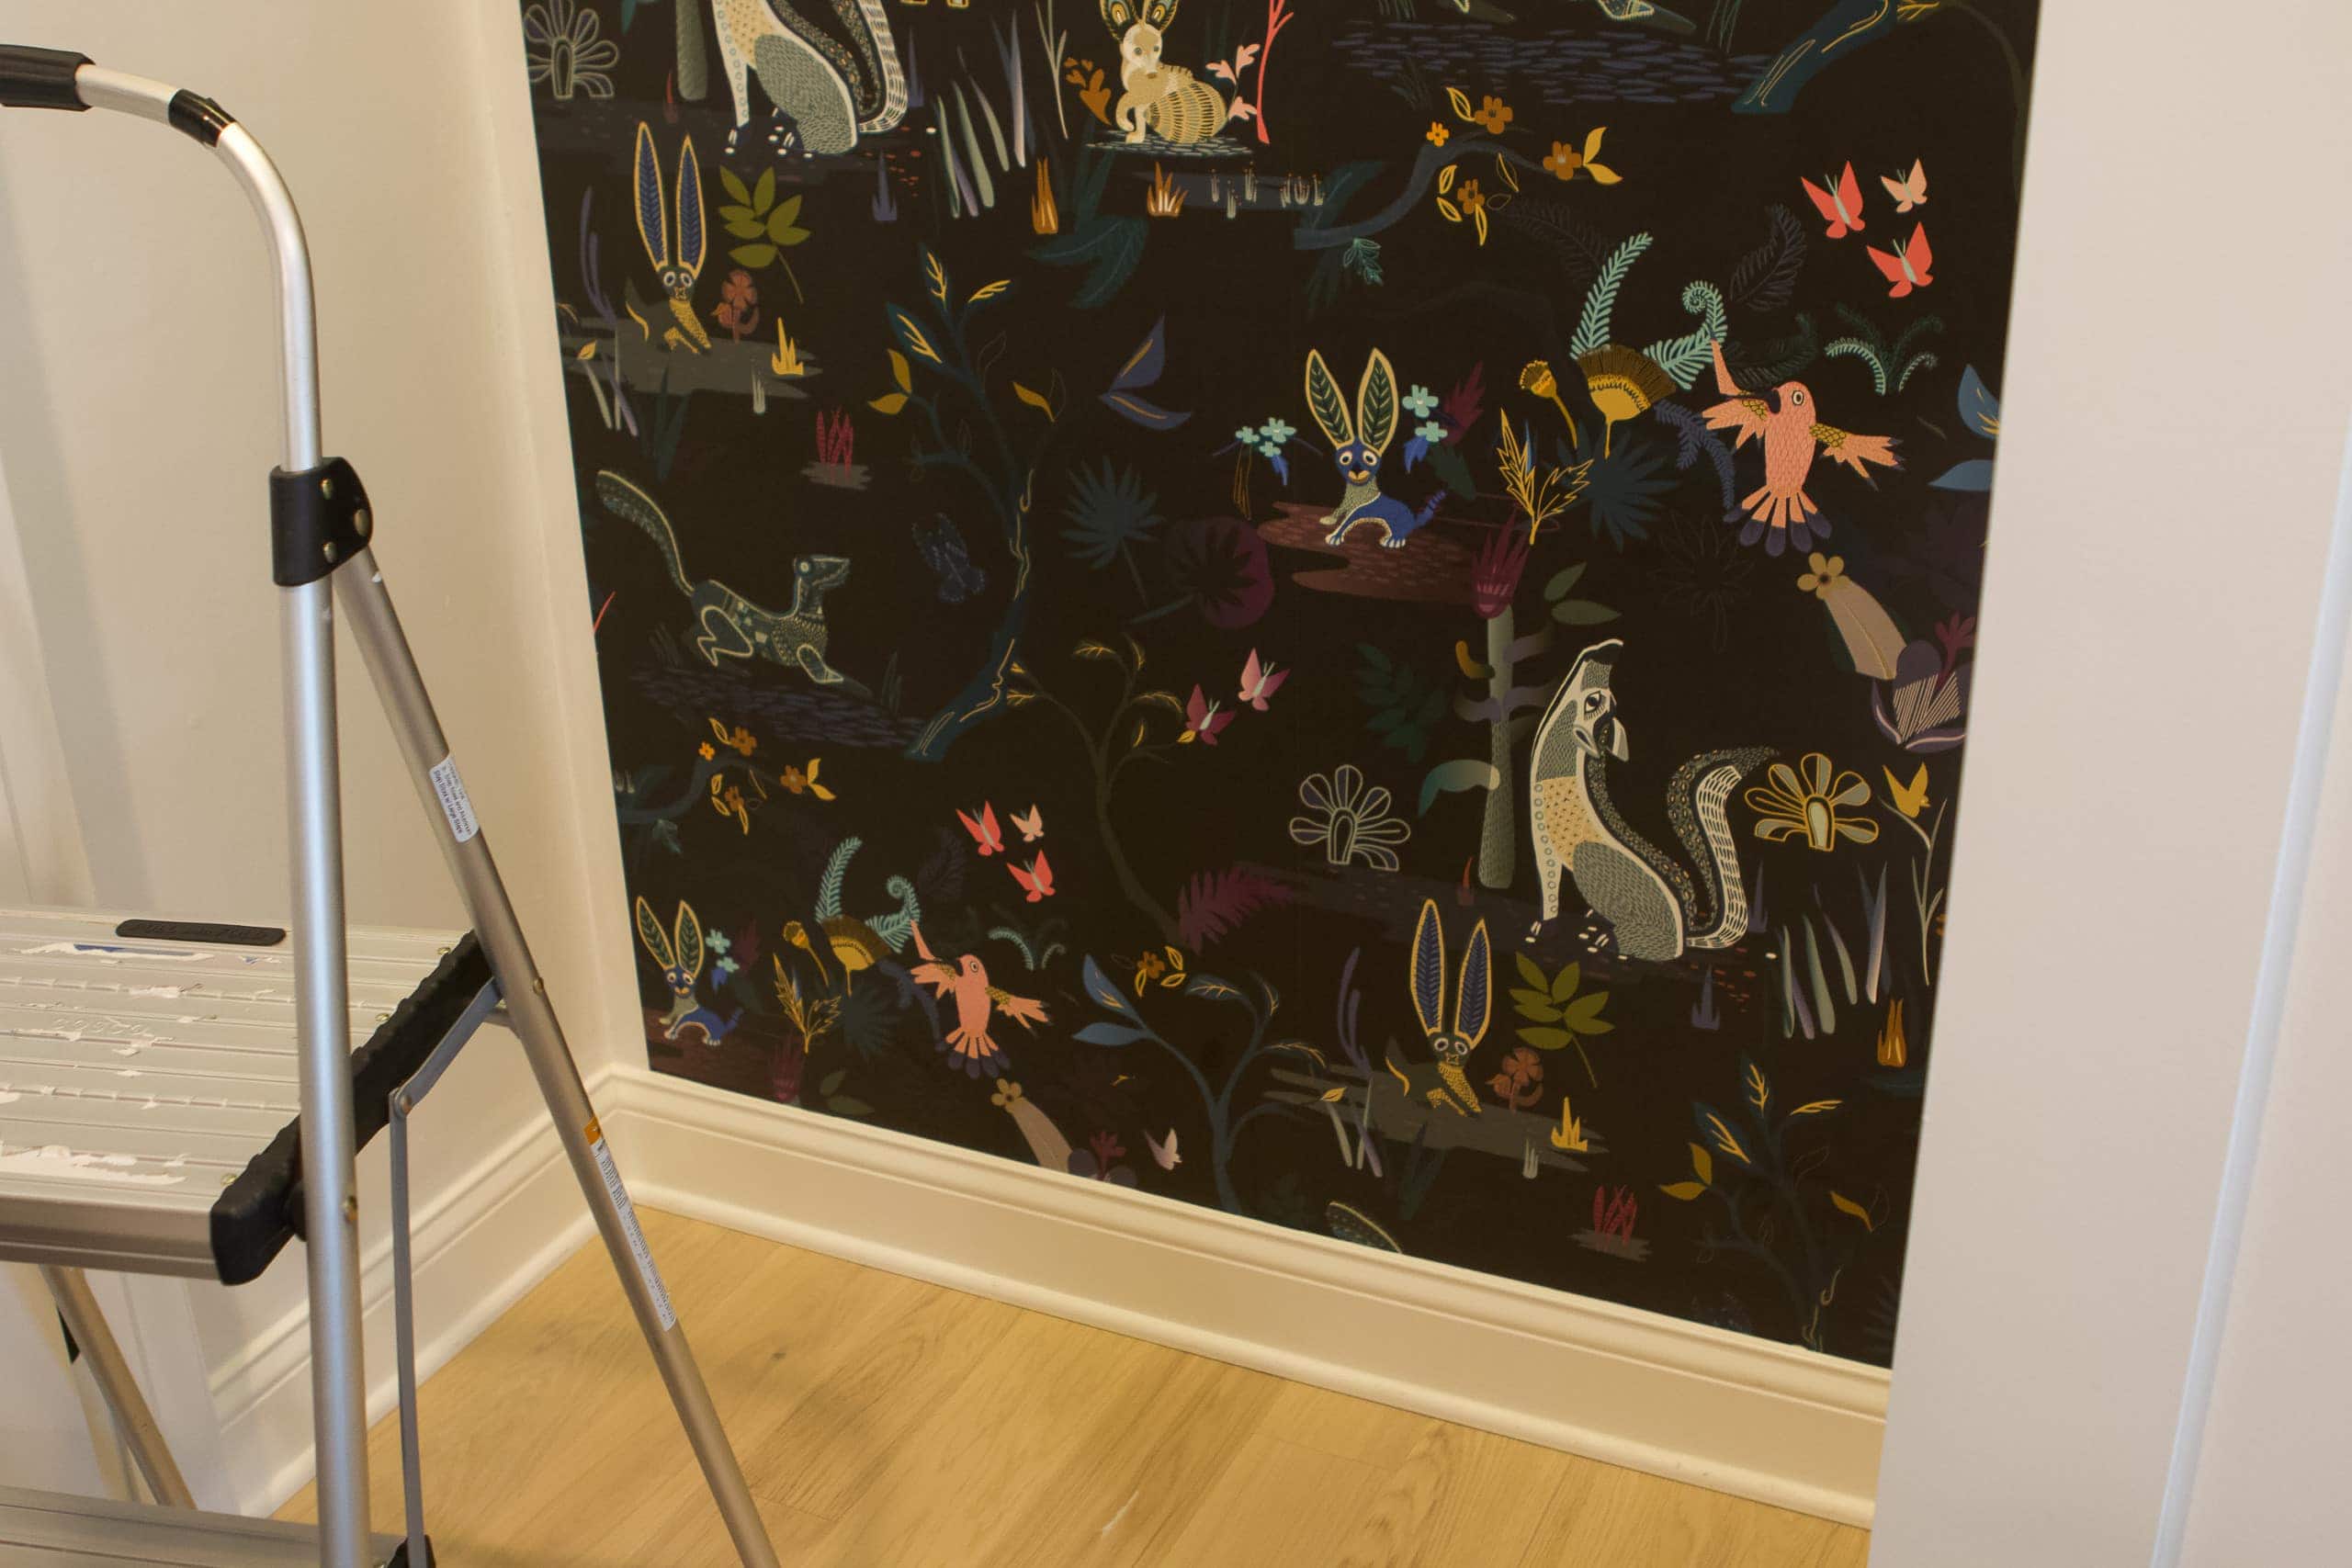 Be sure to match up your pattern when you wallpaper a nursery closet